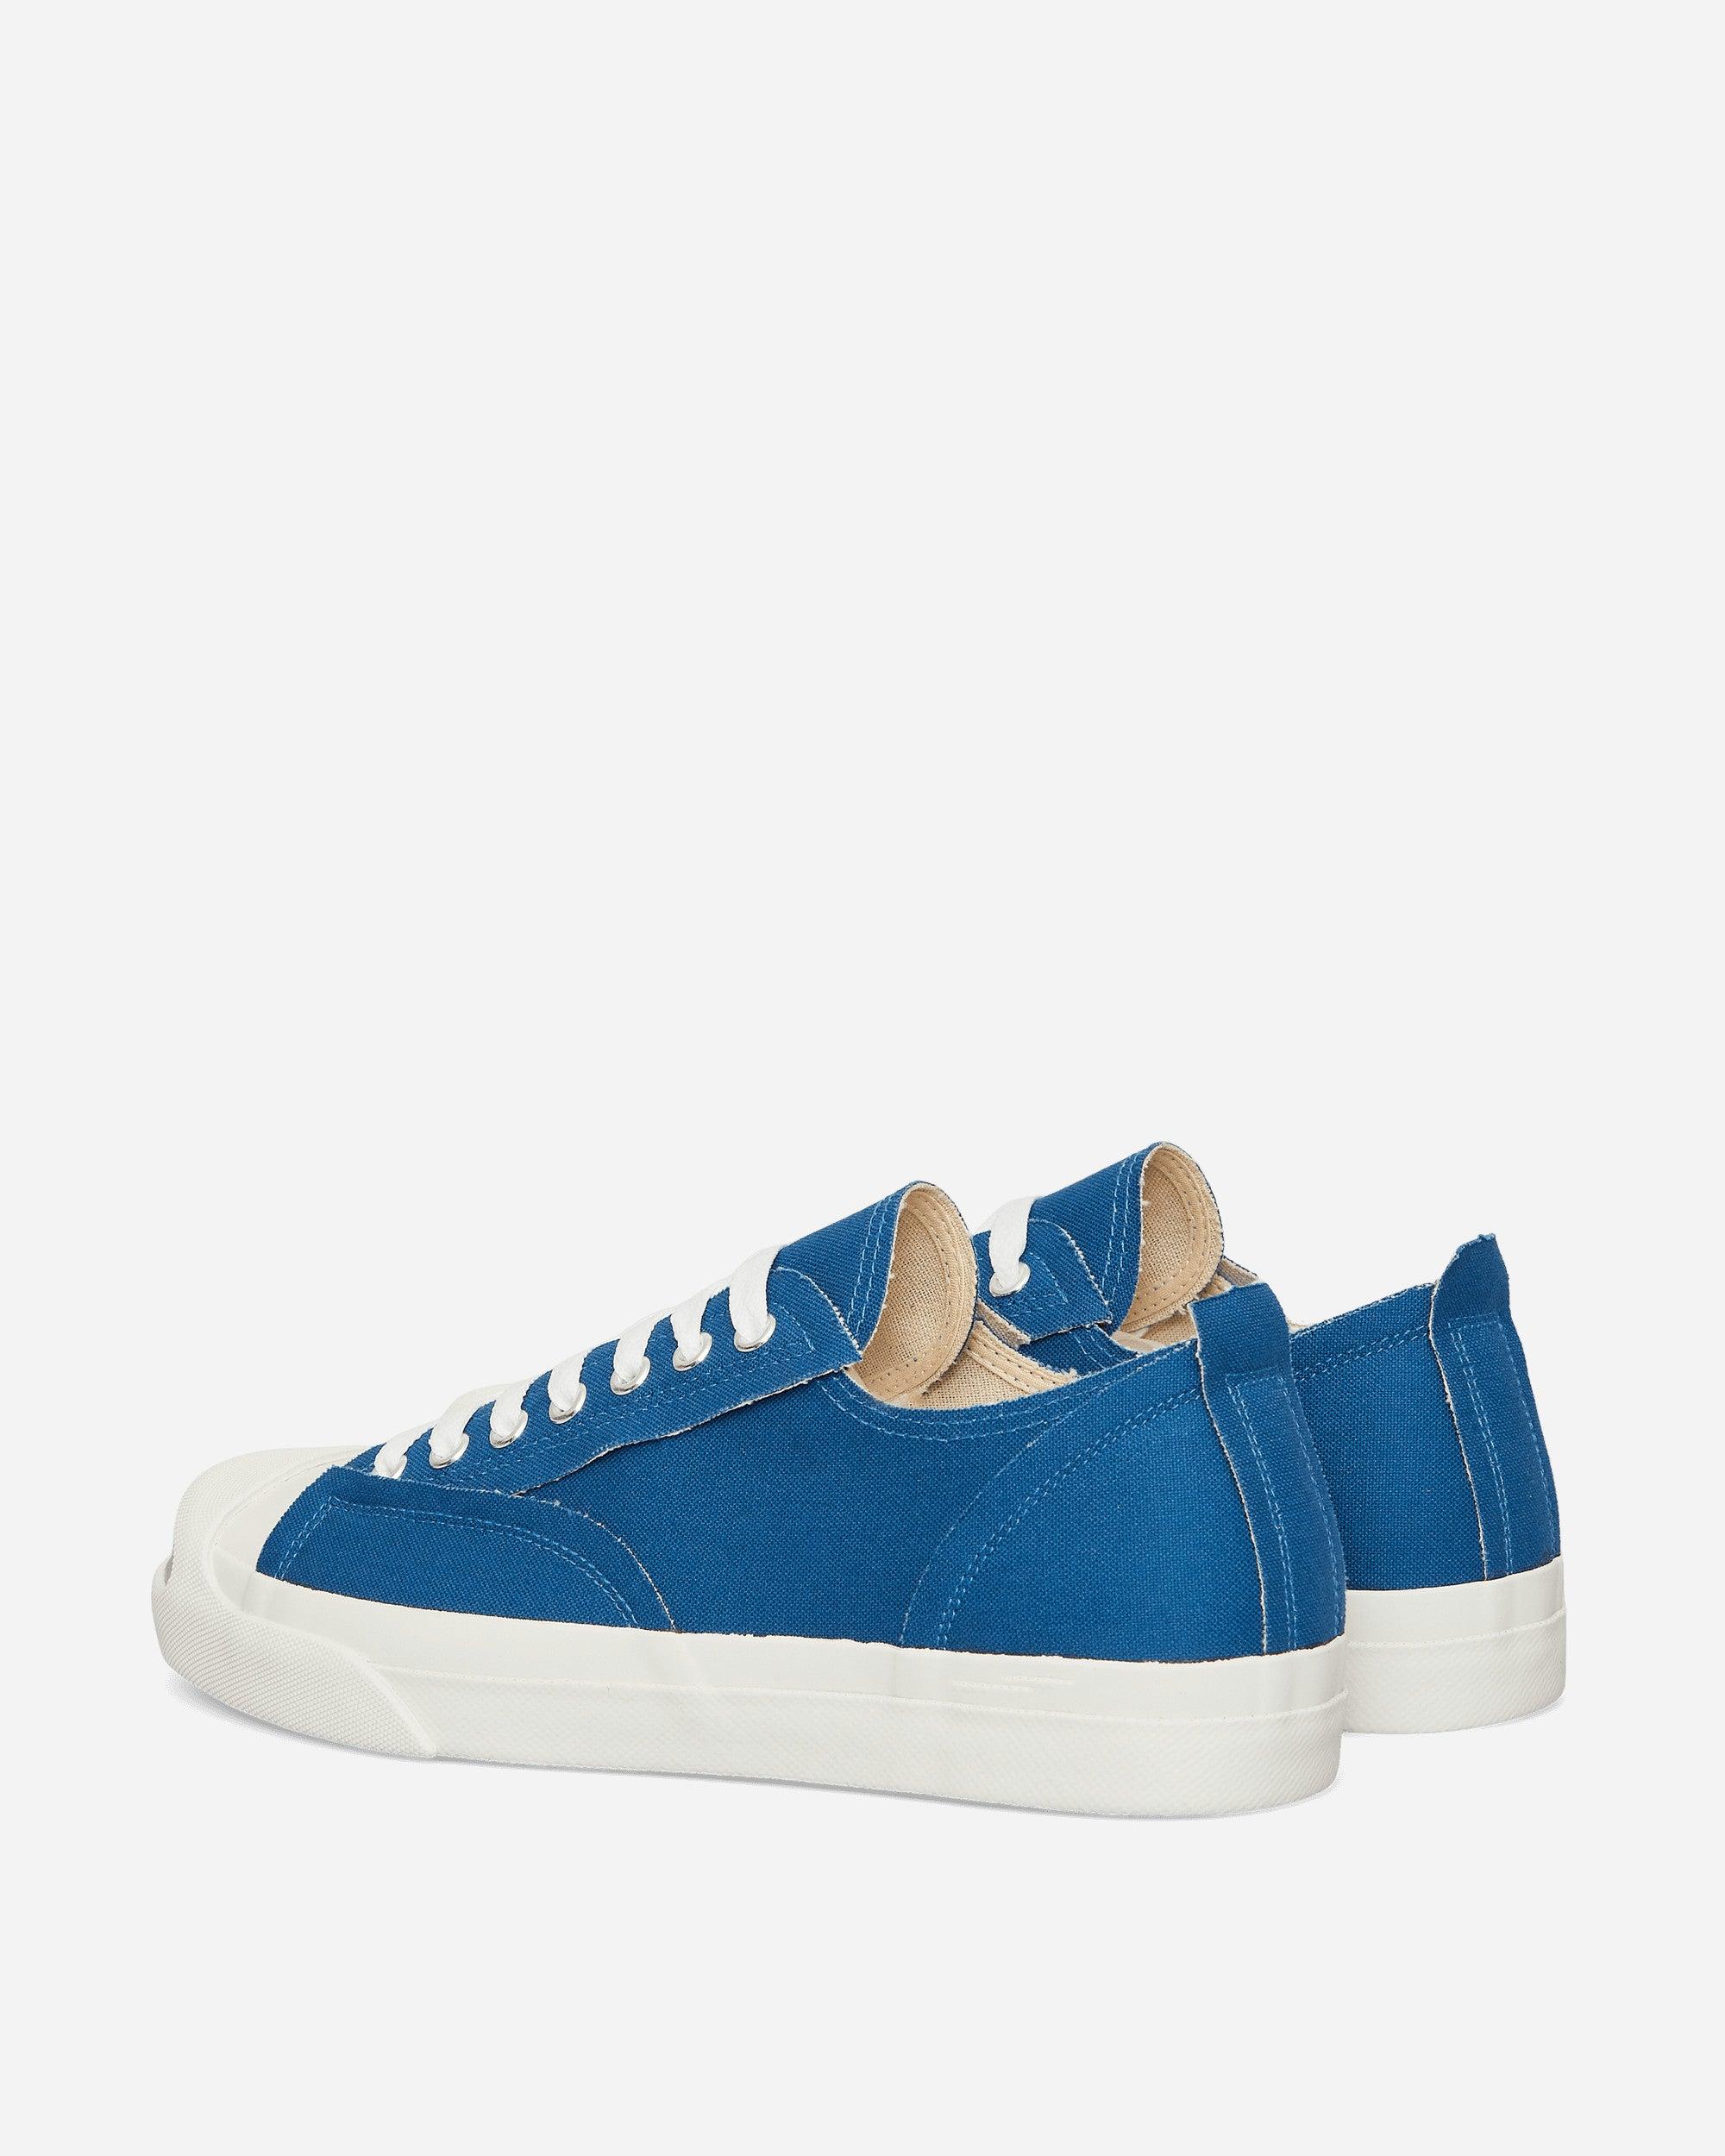 Undercover Canvas Sneakers in Blue for Men | Lyst